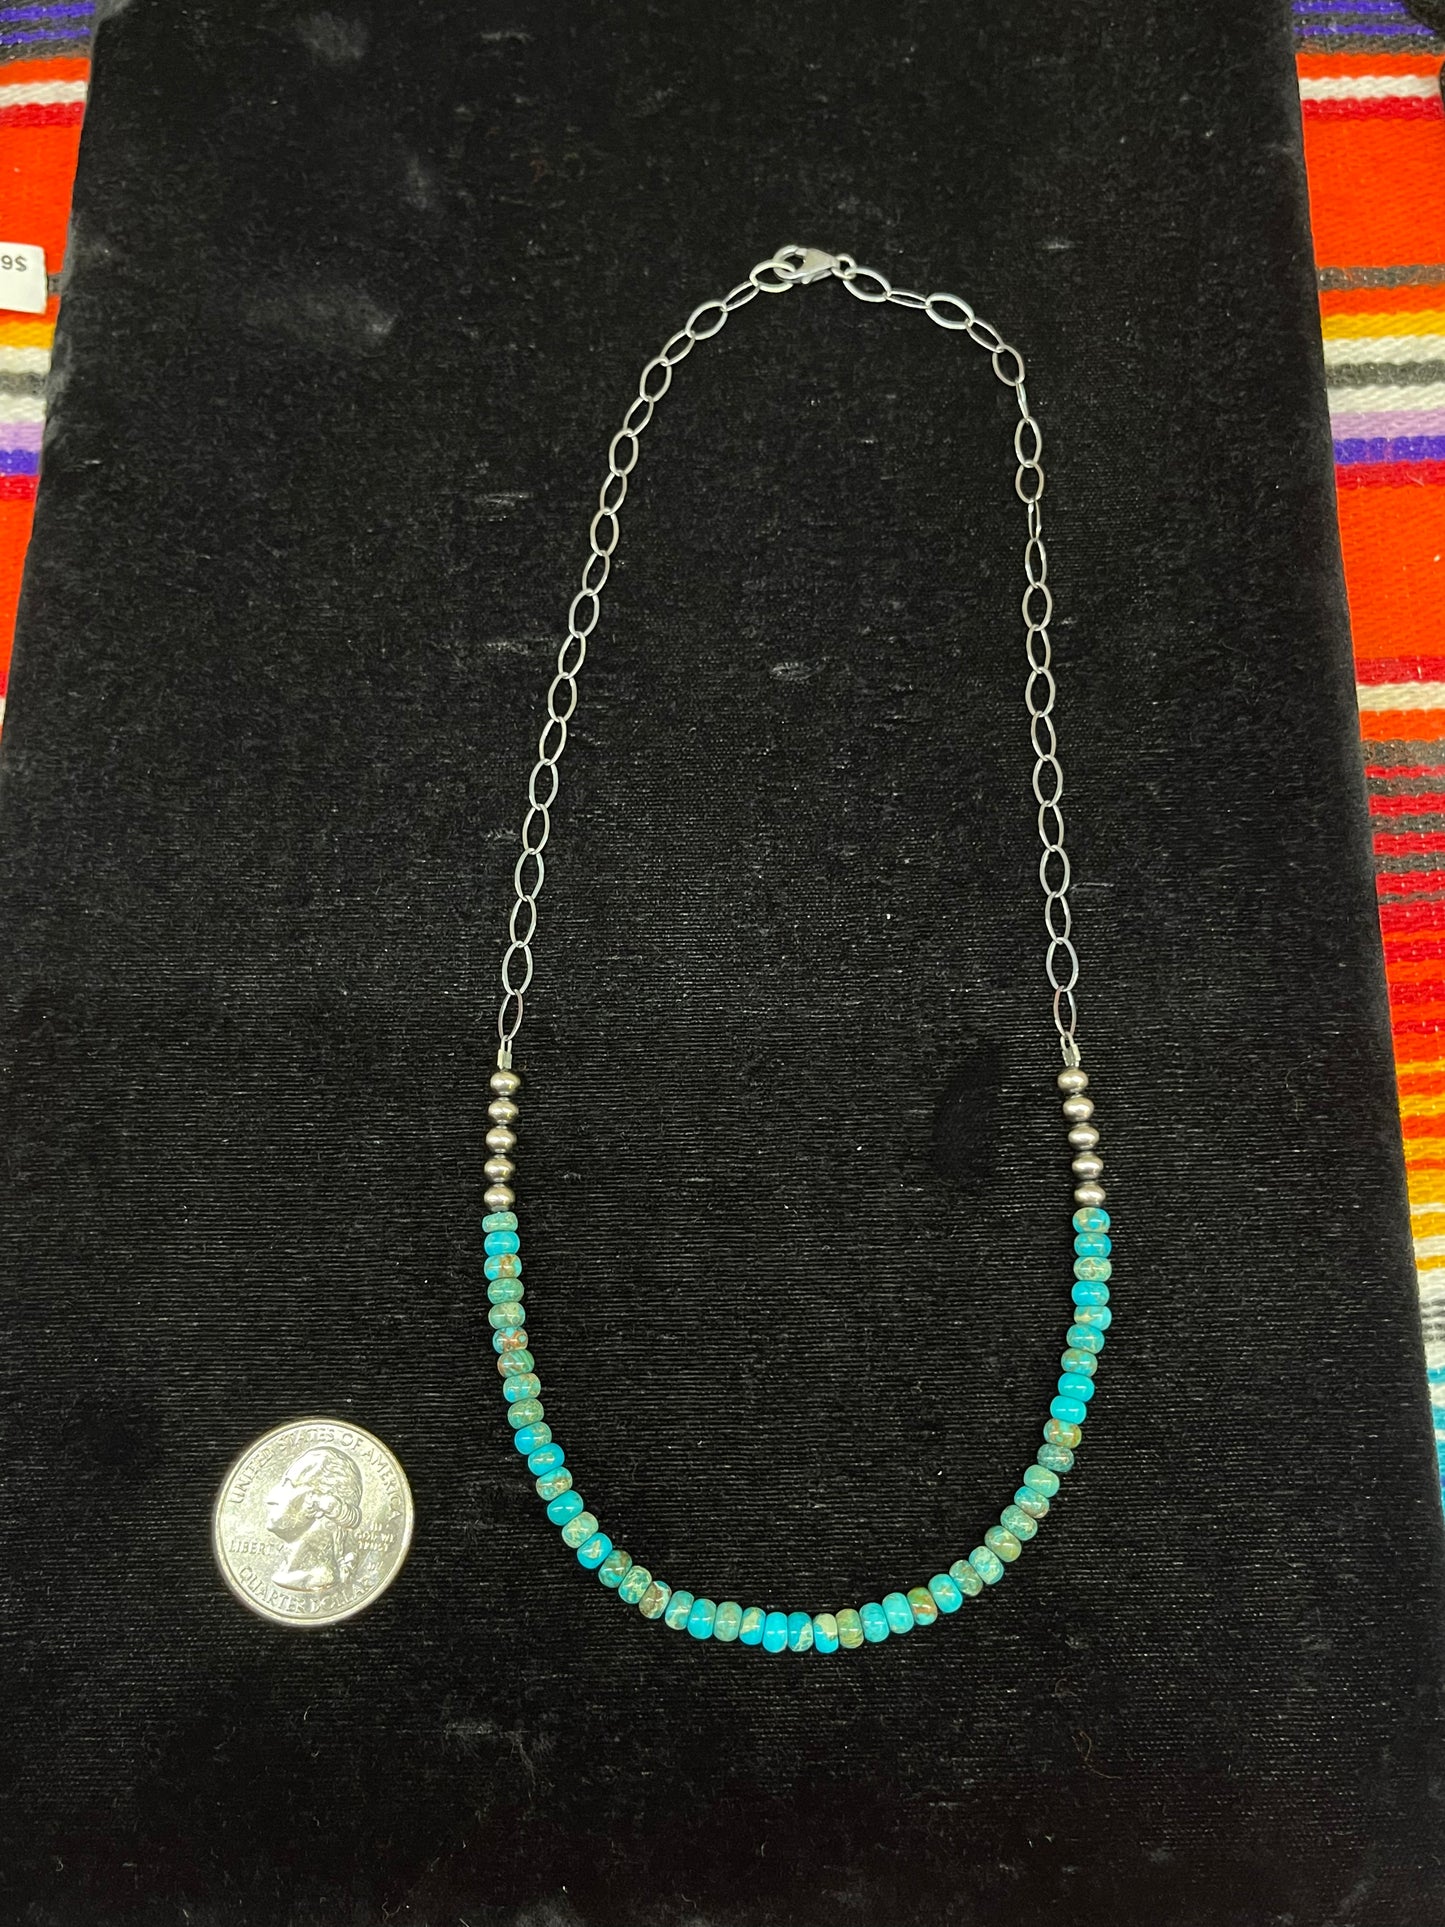 Navajo Pearls with Turquoise Chain Link Necklace